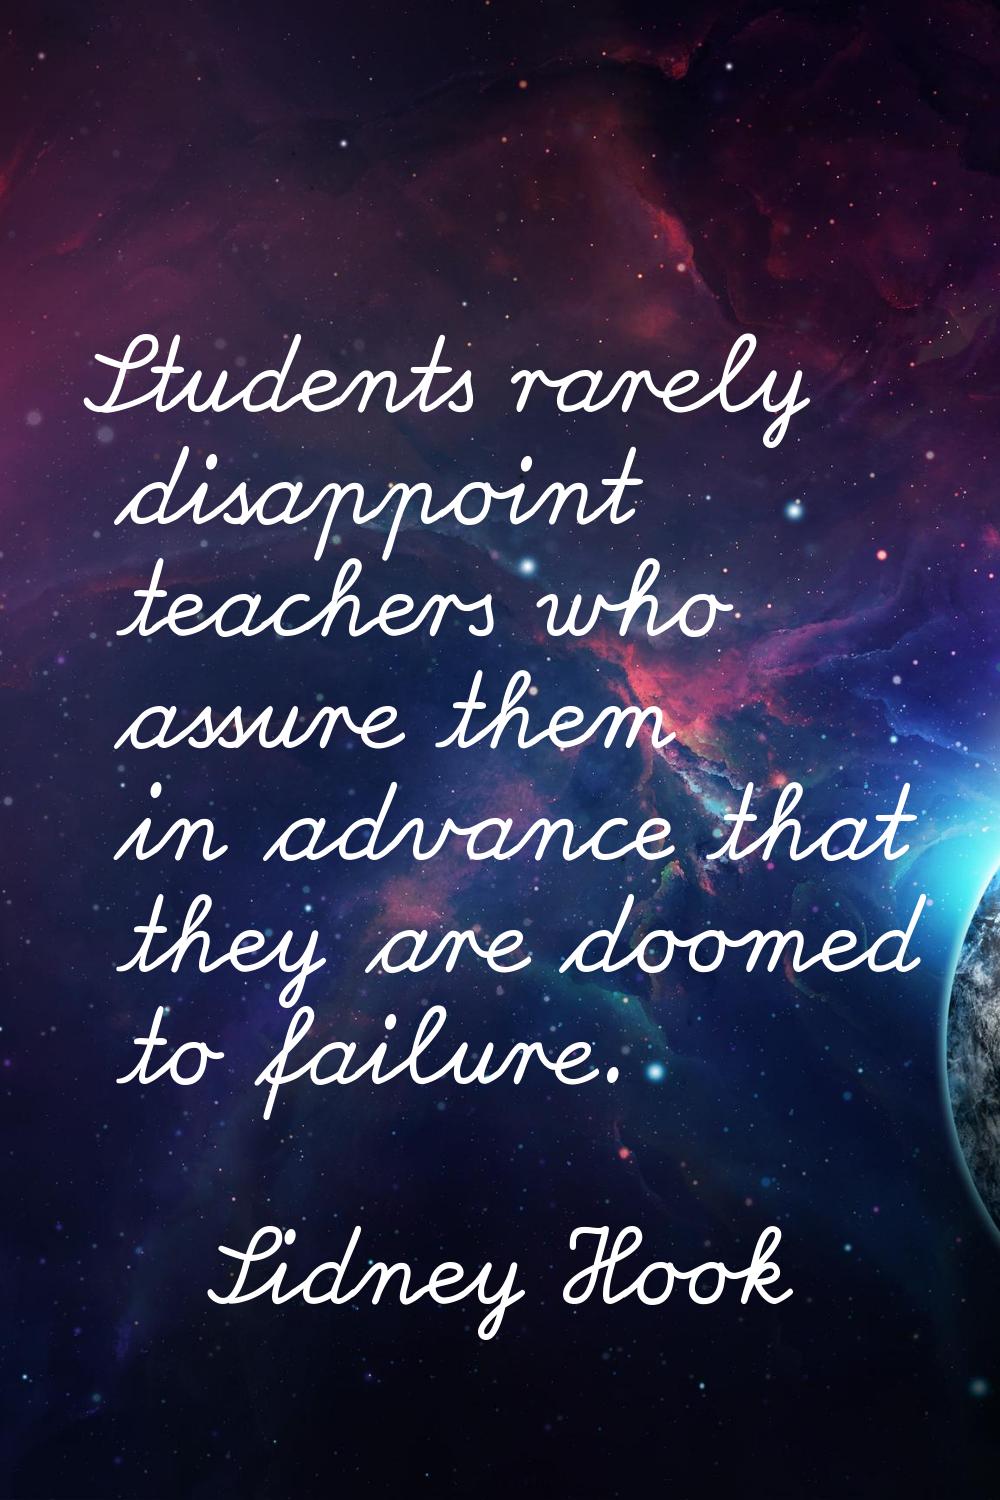 Students rarely disappoint teachers who assure them in advance that they are doomed to failure.